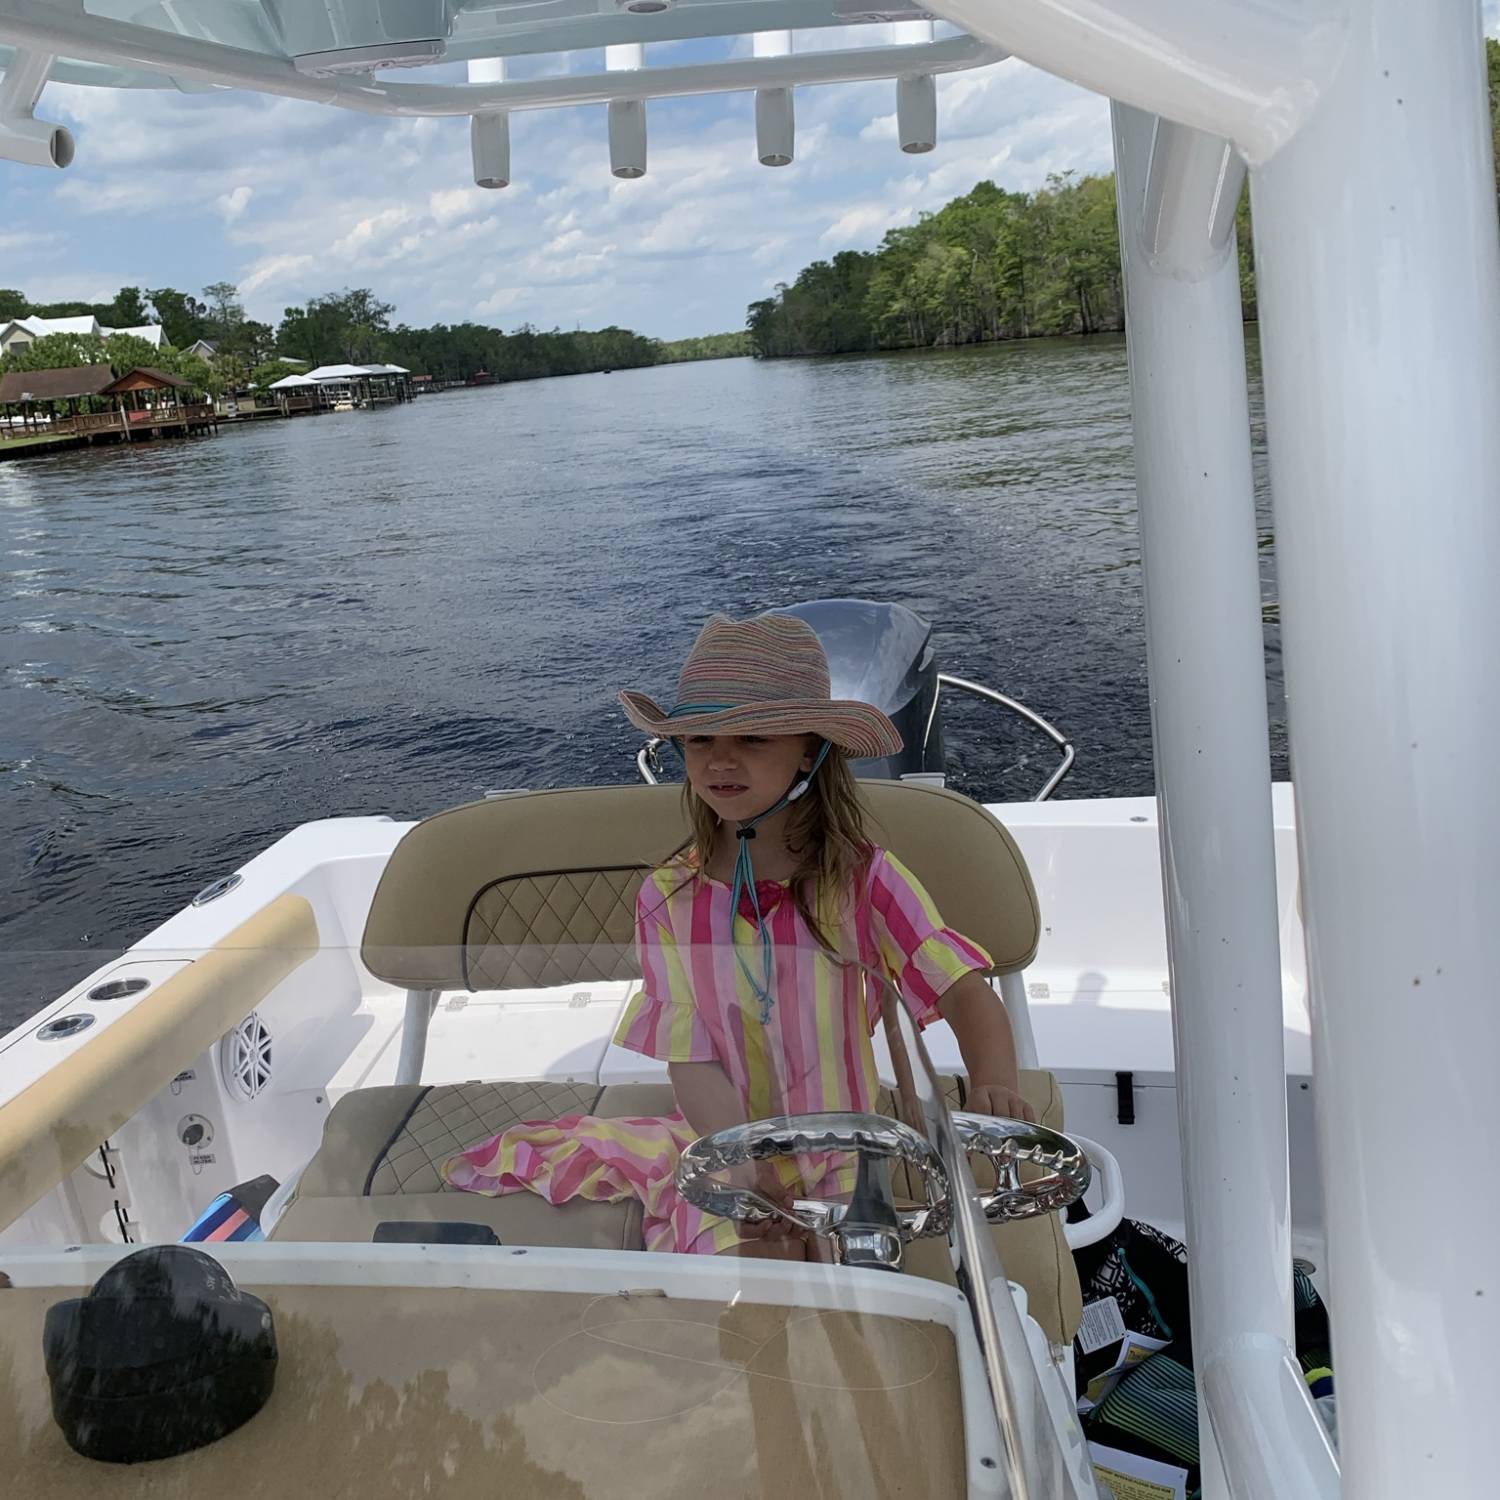 The Little Miss Myrtle beach 2022 pageant queen has taken the helm and is definitely the prince...